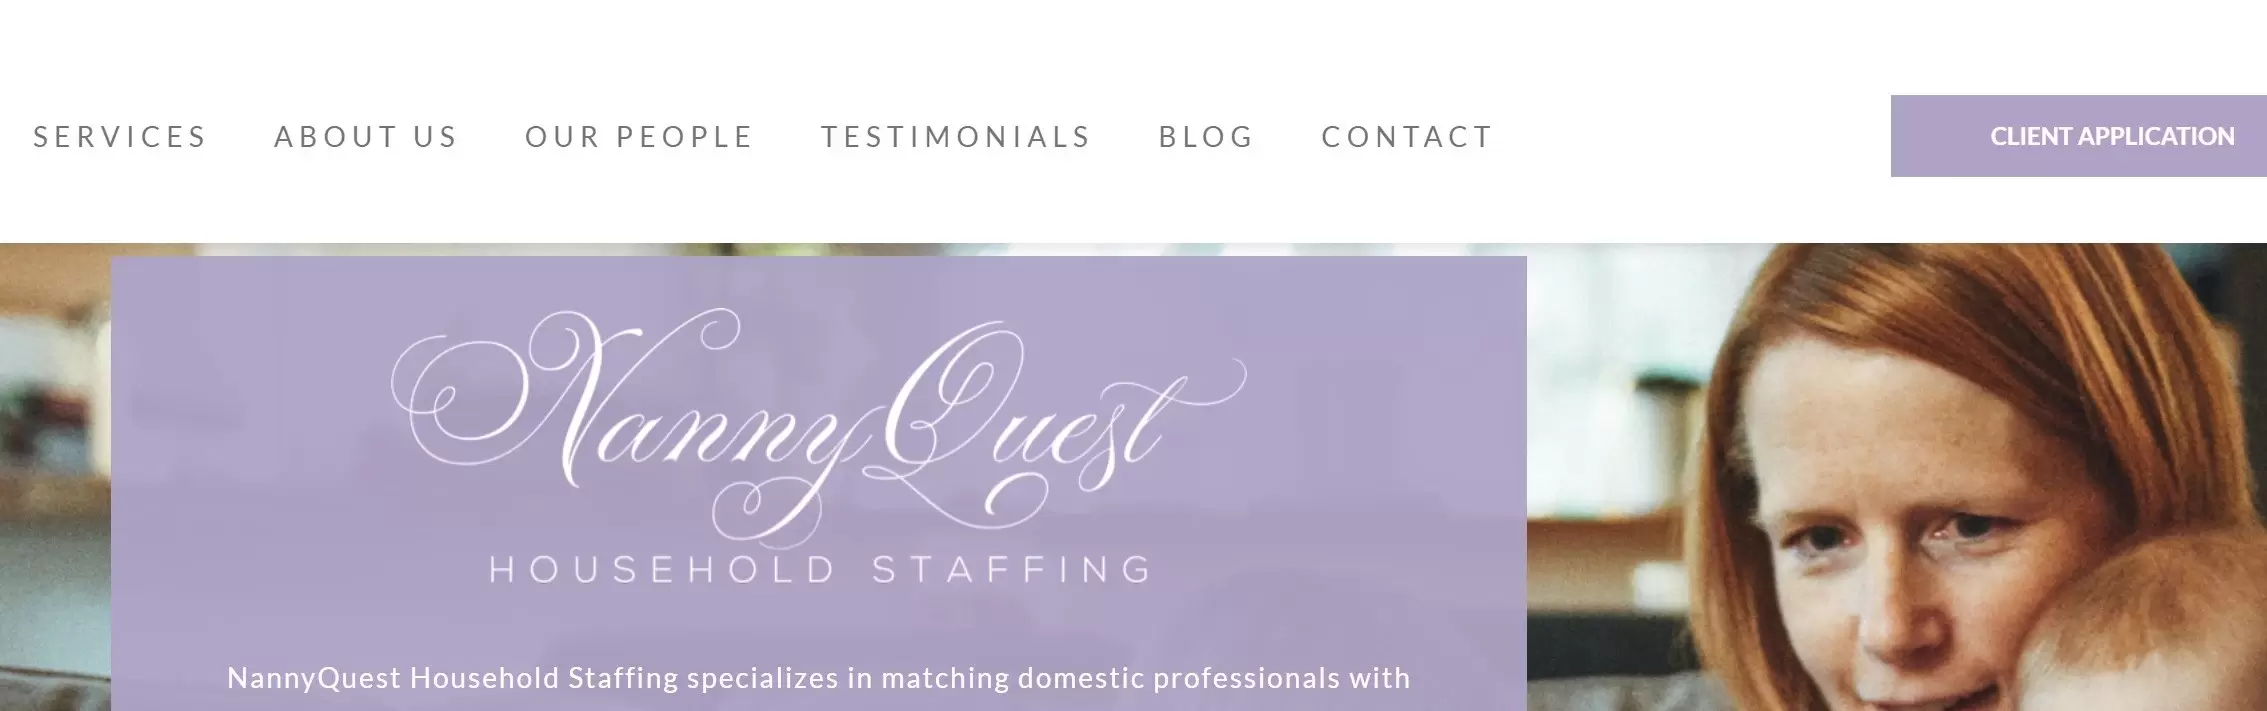 NannyQuest Household Staffing company profile and review